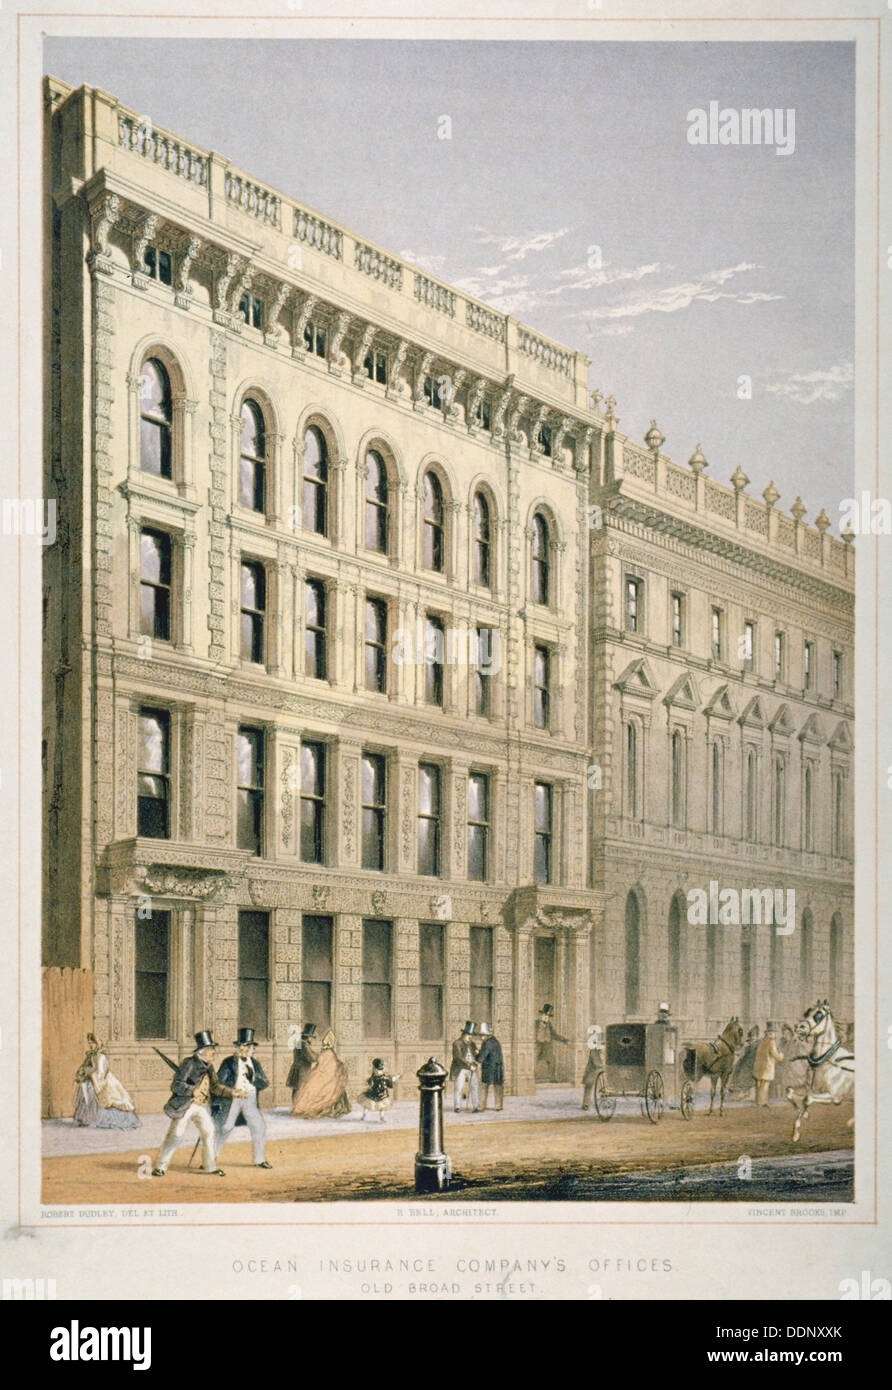 View of the Ocean Insurance Company's Offices, Old Broad Street, City of London, 1864. Artist: Robert Dudley Stock Photo